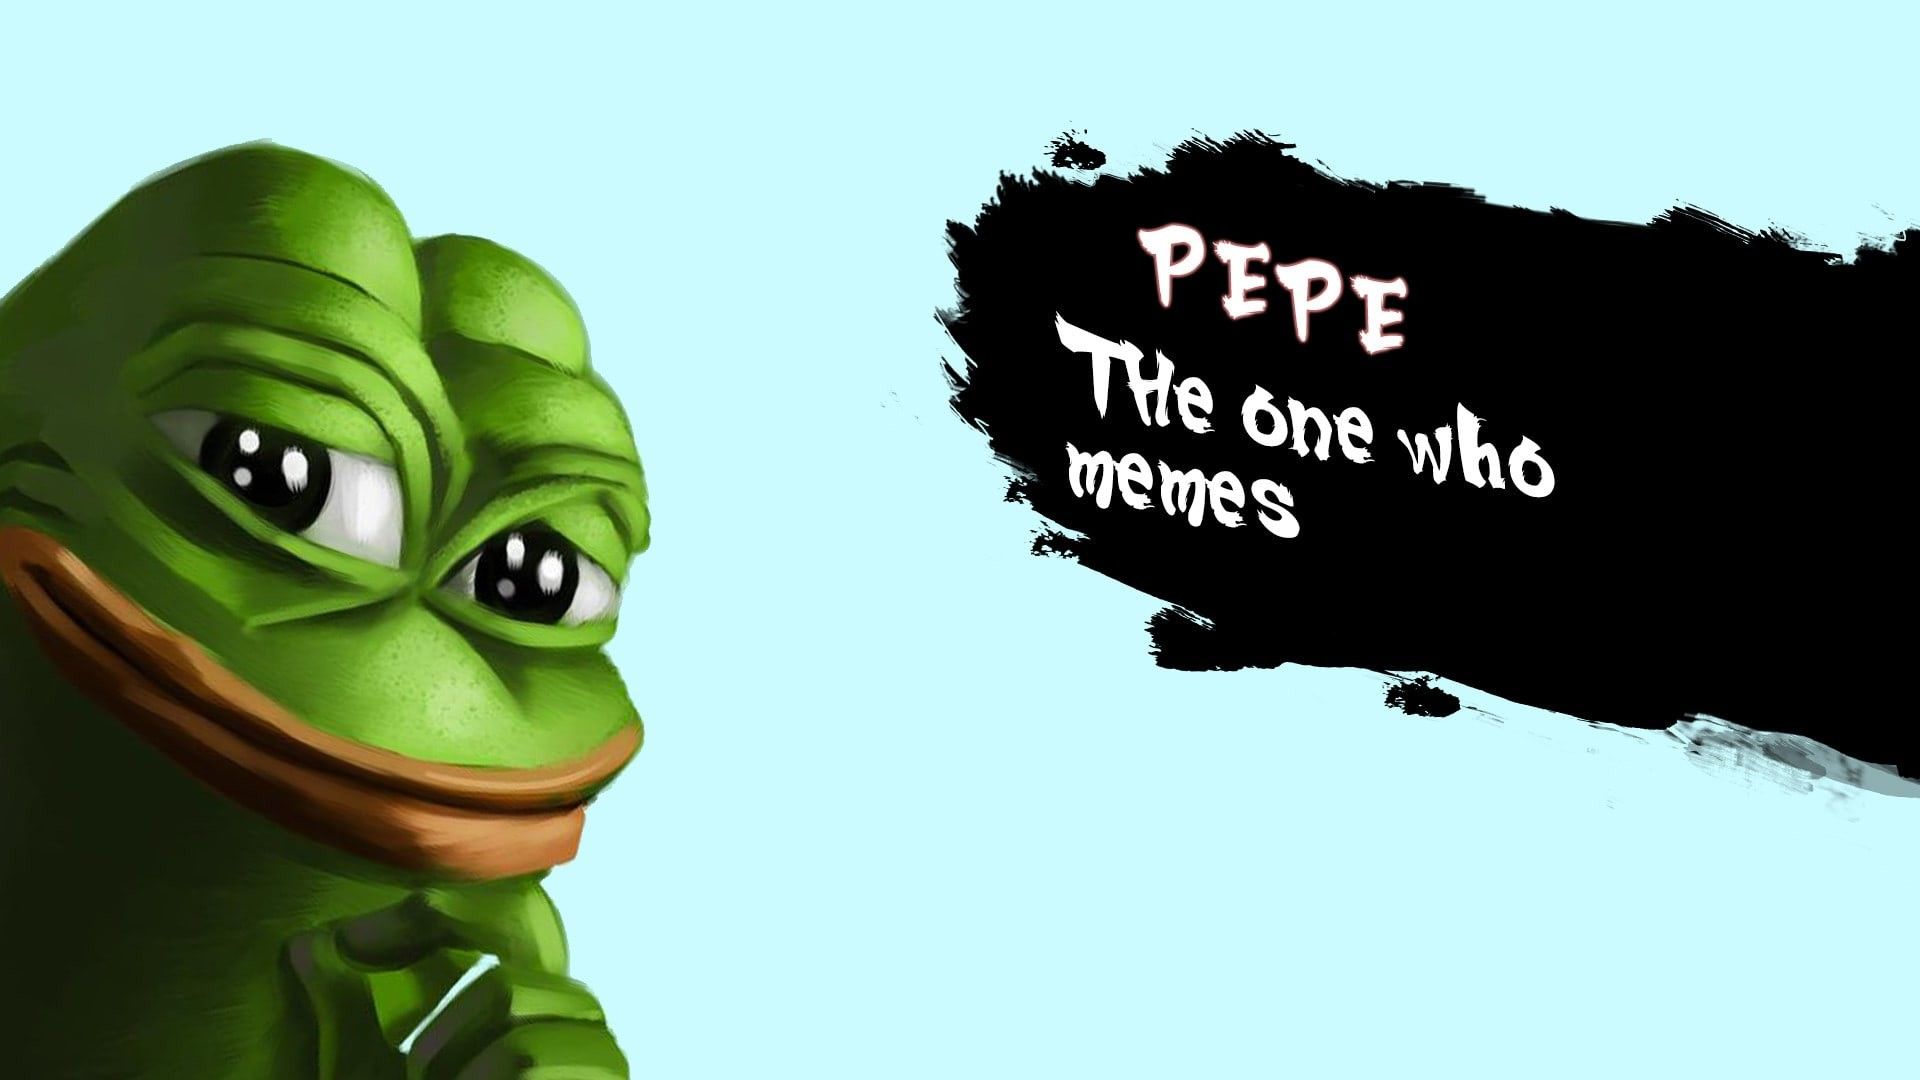 free cool Pepe The Frog Meme chrome extension HD wallpaper theme tab for chrome browser!